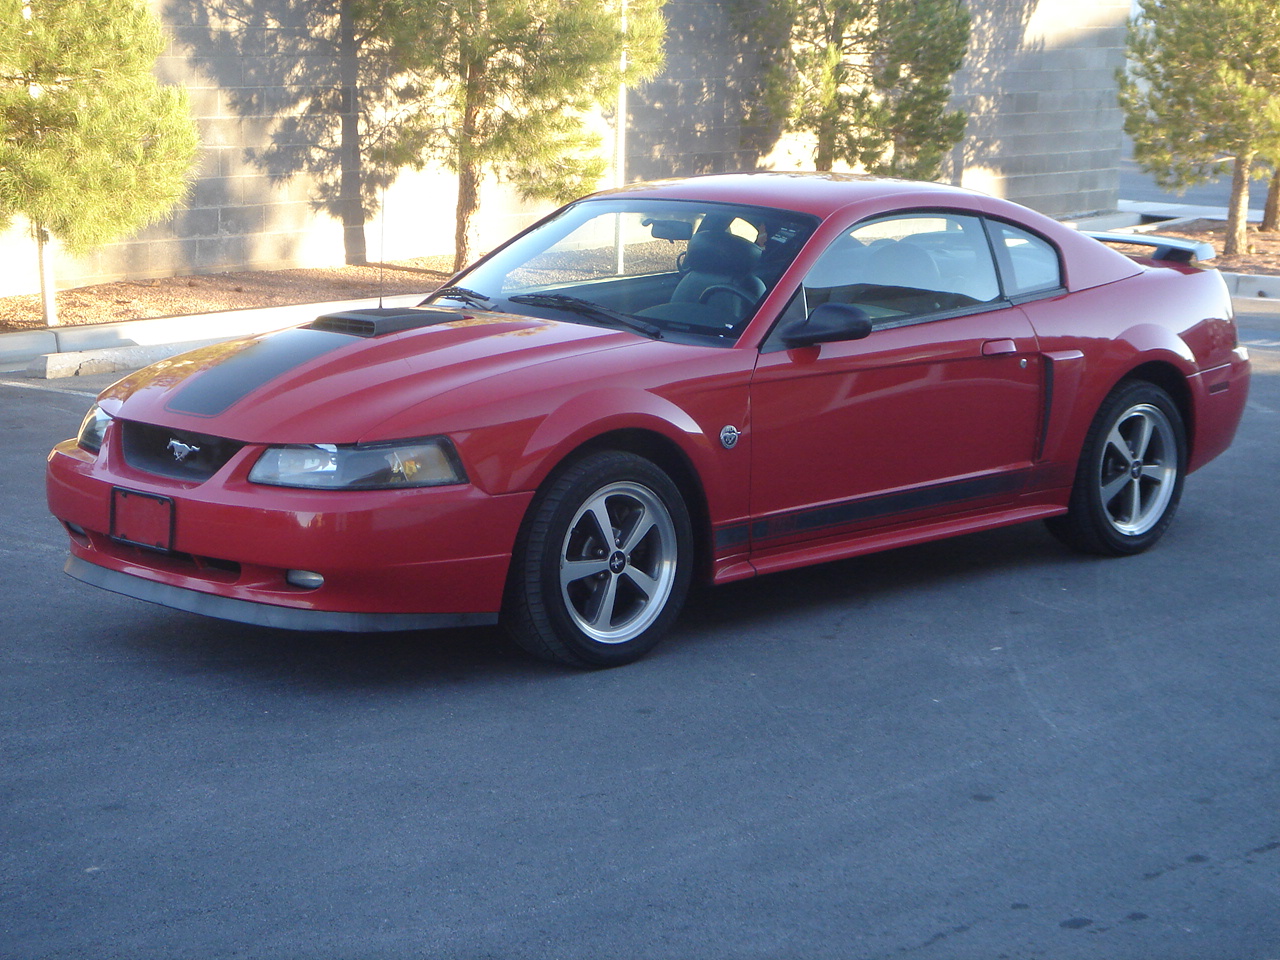 2004 Ford mach 1 mustang specs